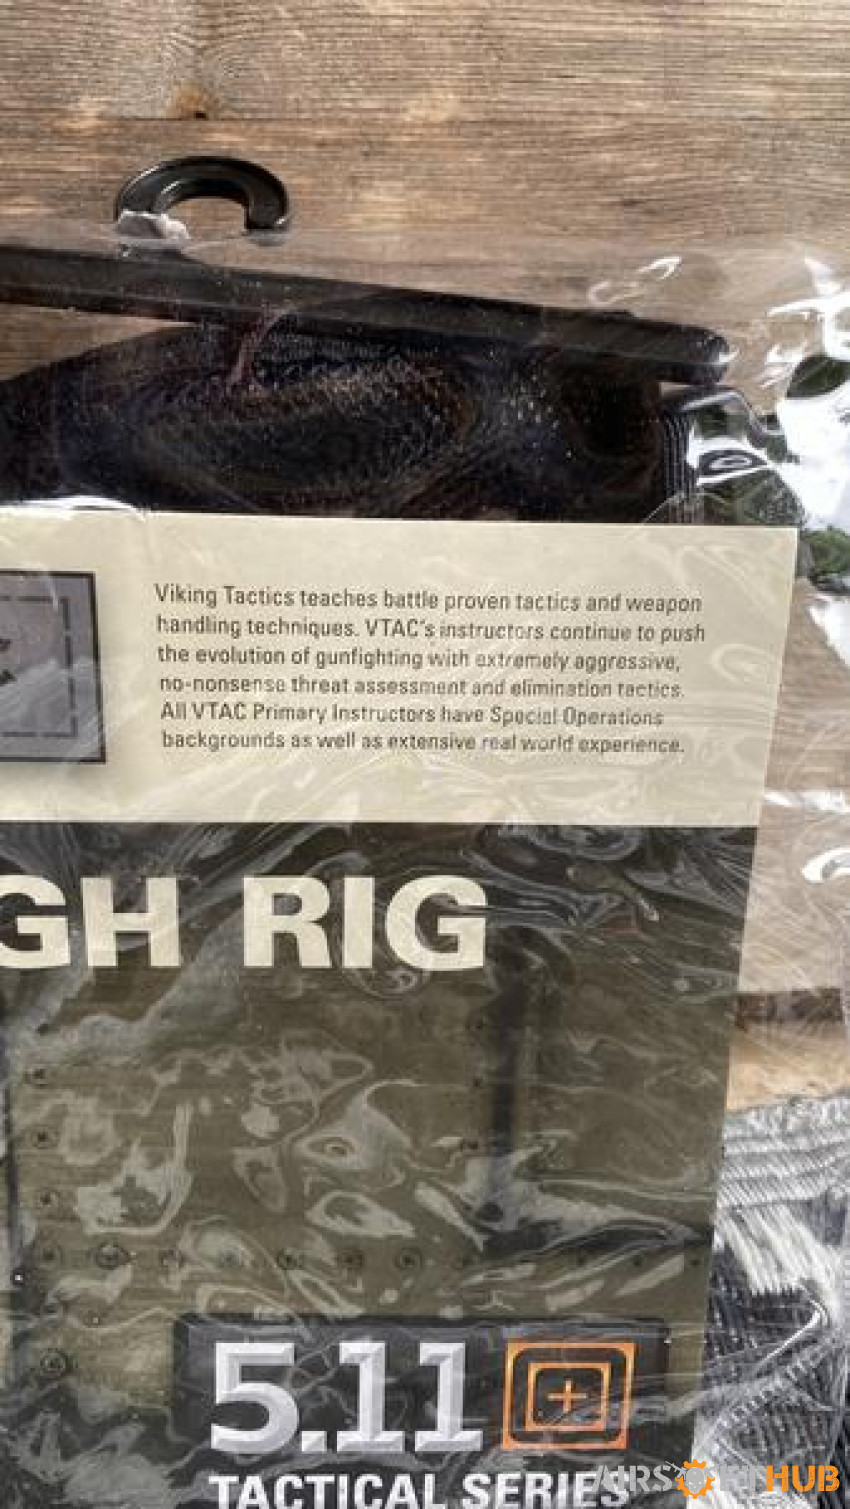 511 Tactical Thigh rig (black) - Used airsoft equipment